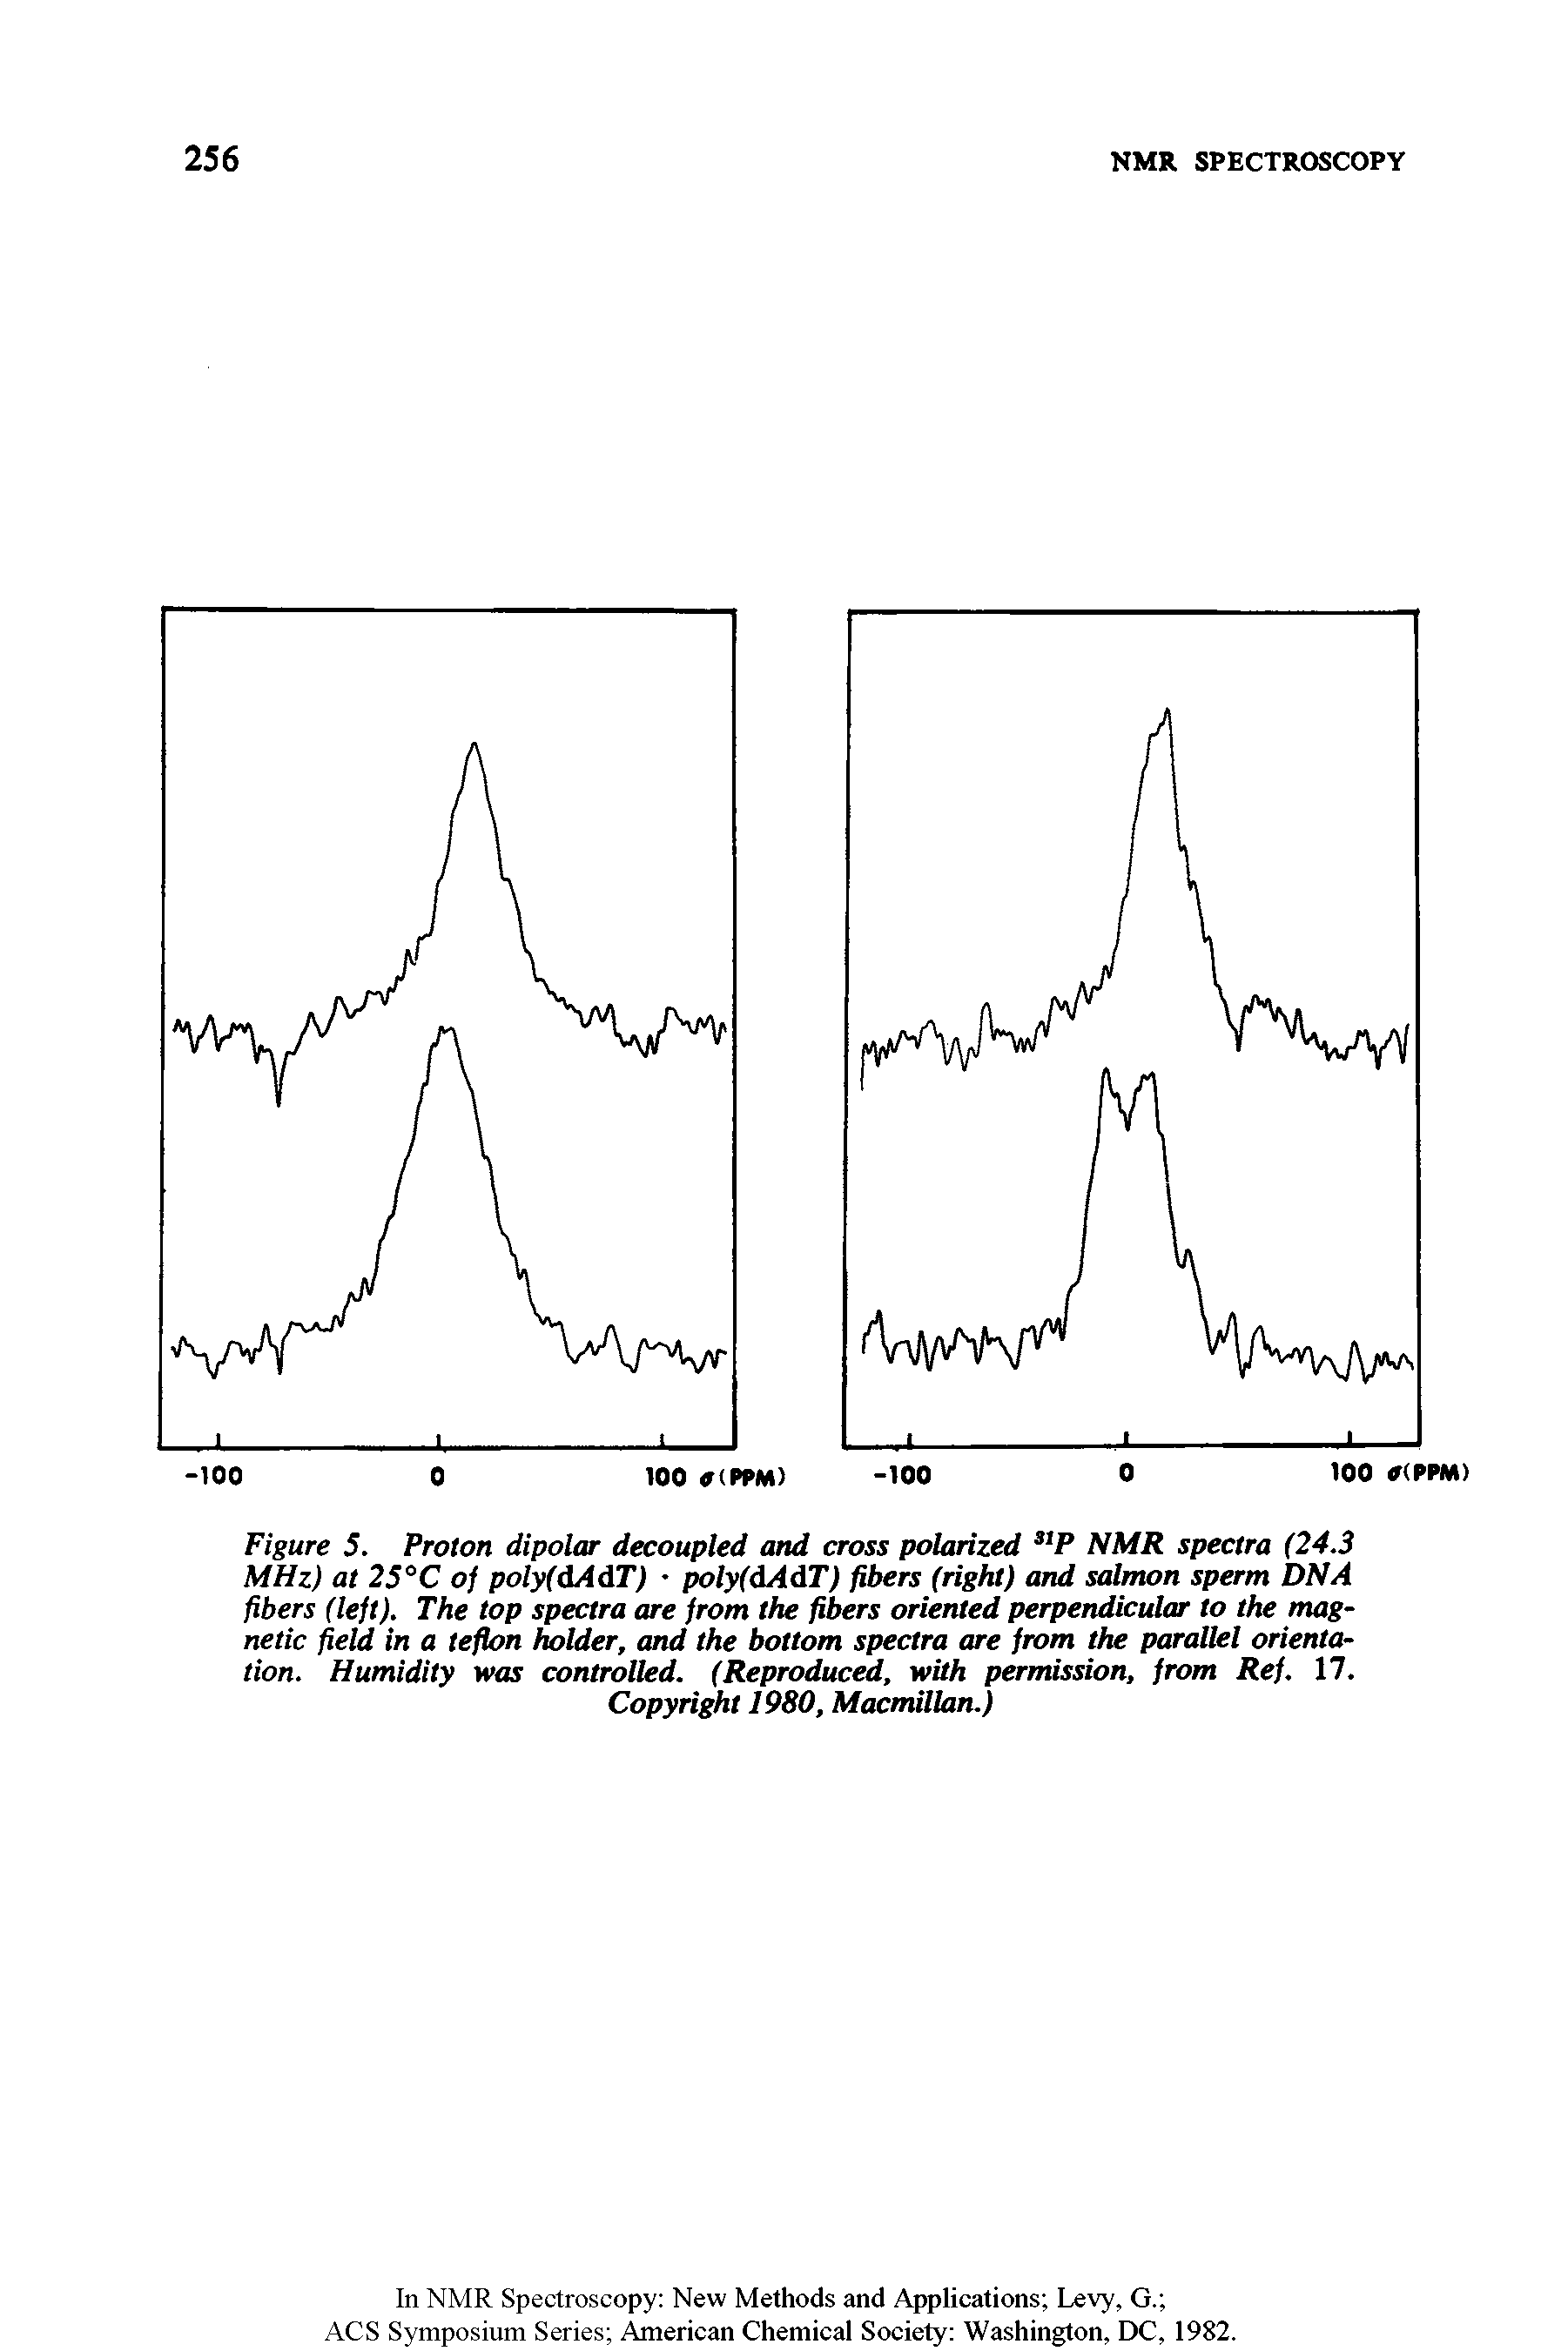 Figure 5. Proton dipolar decoupled and cross polarized NMR spectra (24.3 MHz) at 25°C of poly(dAdT) poly(dAdT) fibers (right) and sal n sperm DNA fibers (left). The top spectra are from the fibers oriented perpendicular to the magnetic field in a teflon holder, and the bottom spectra are from parallel orientation. Humidity was controlled. (Reproduce, with permission, from Ref. 17.